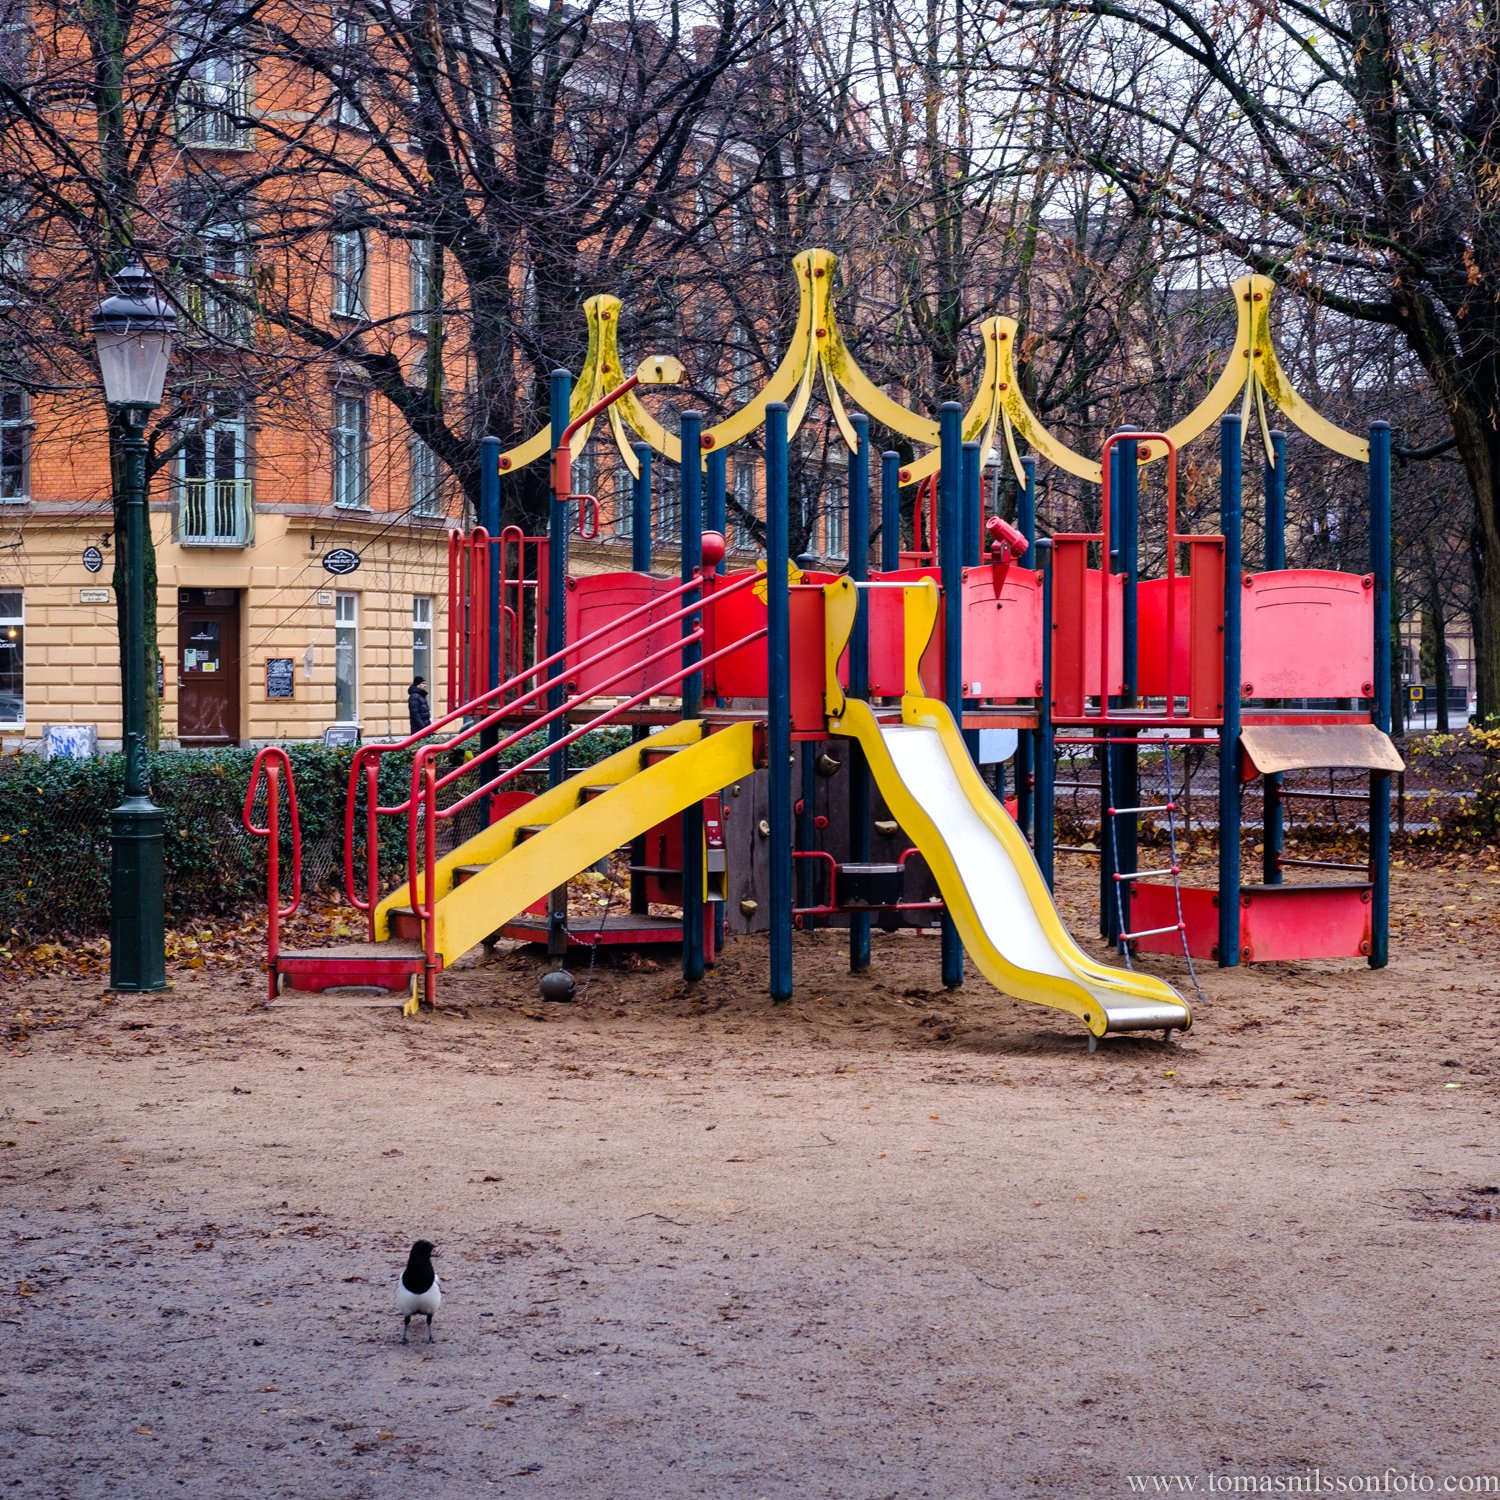 Day 336 - December 2: Playground for the birds